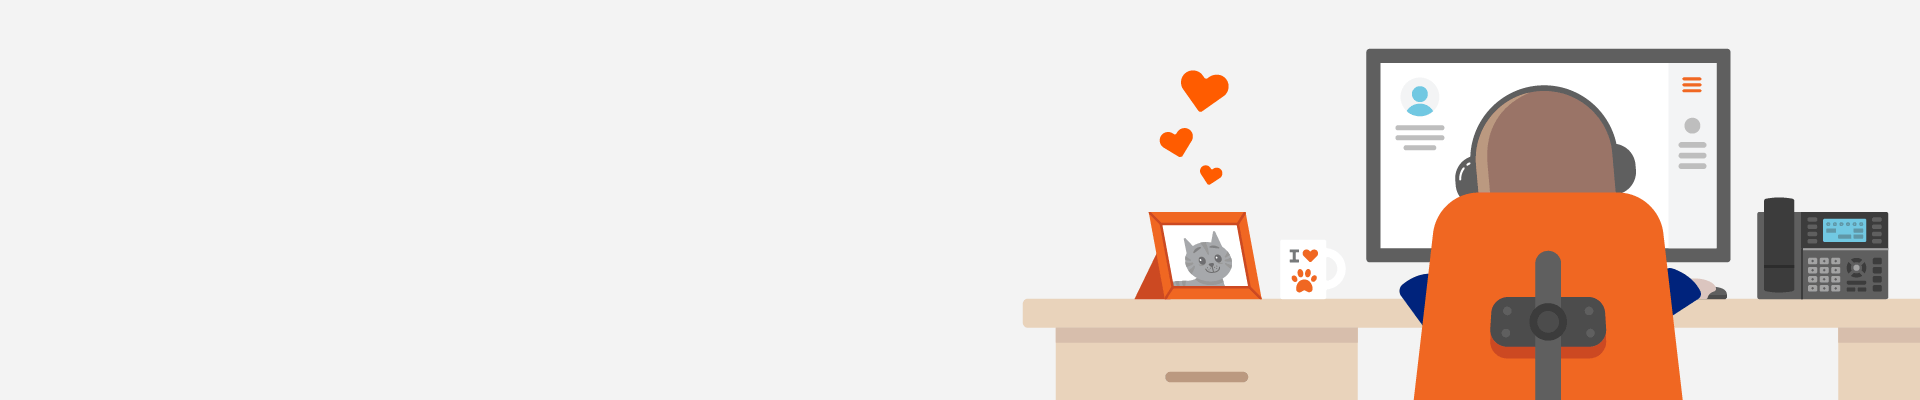 Illustrated banner of a person working at their desk